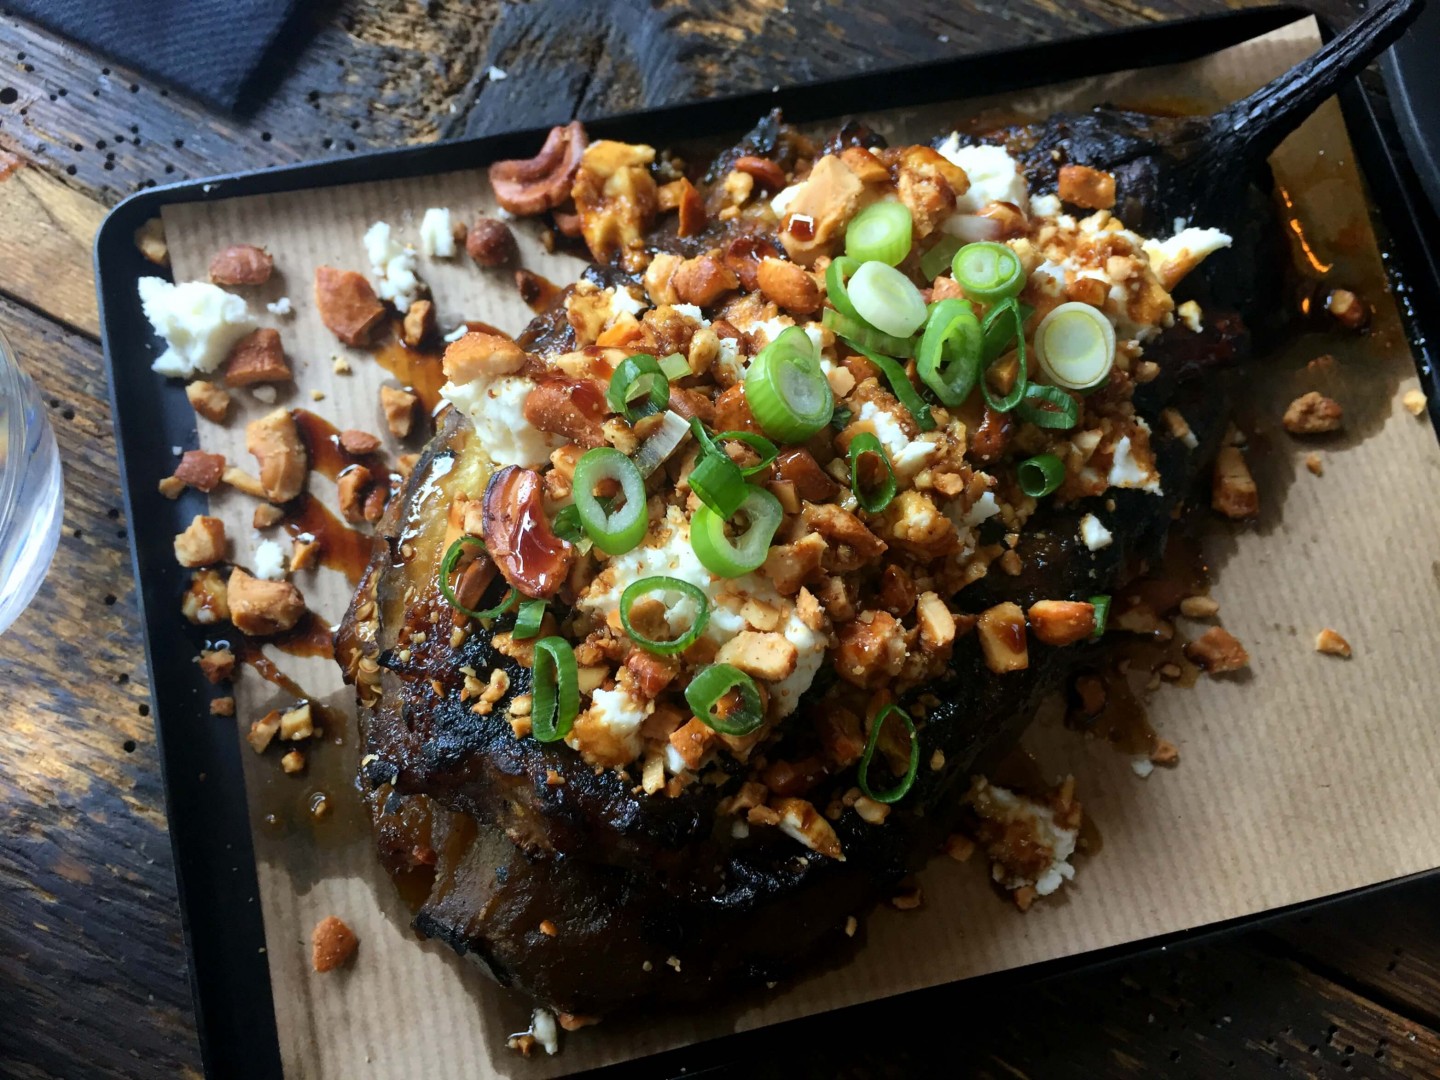 The miso aubergine is topped with roasted cashews and is so delicious at Smokestak, London.